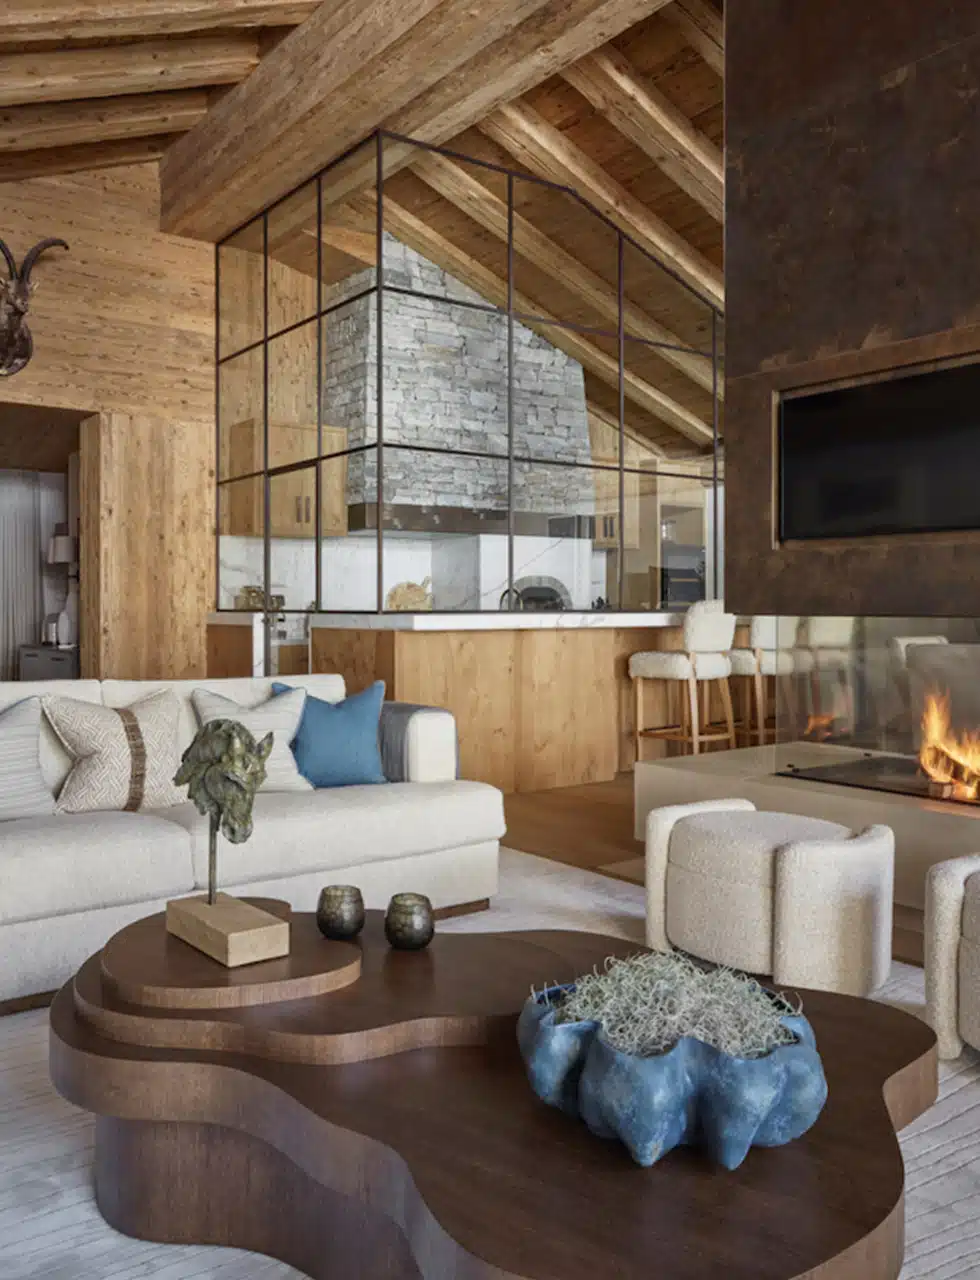 A contemporary Ski Chalet with interior design by Katharine Pooley